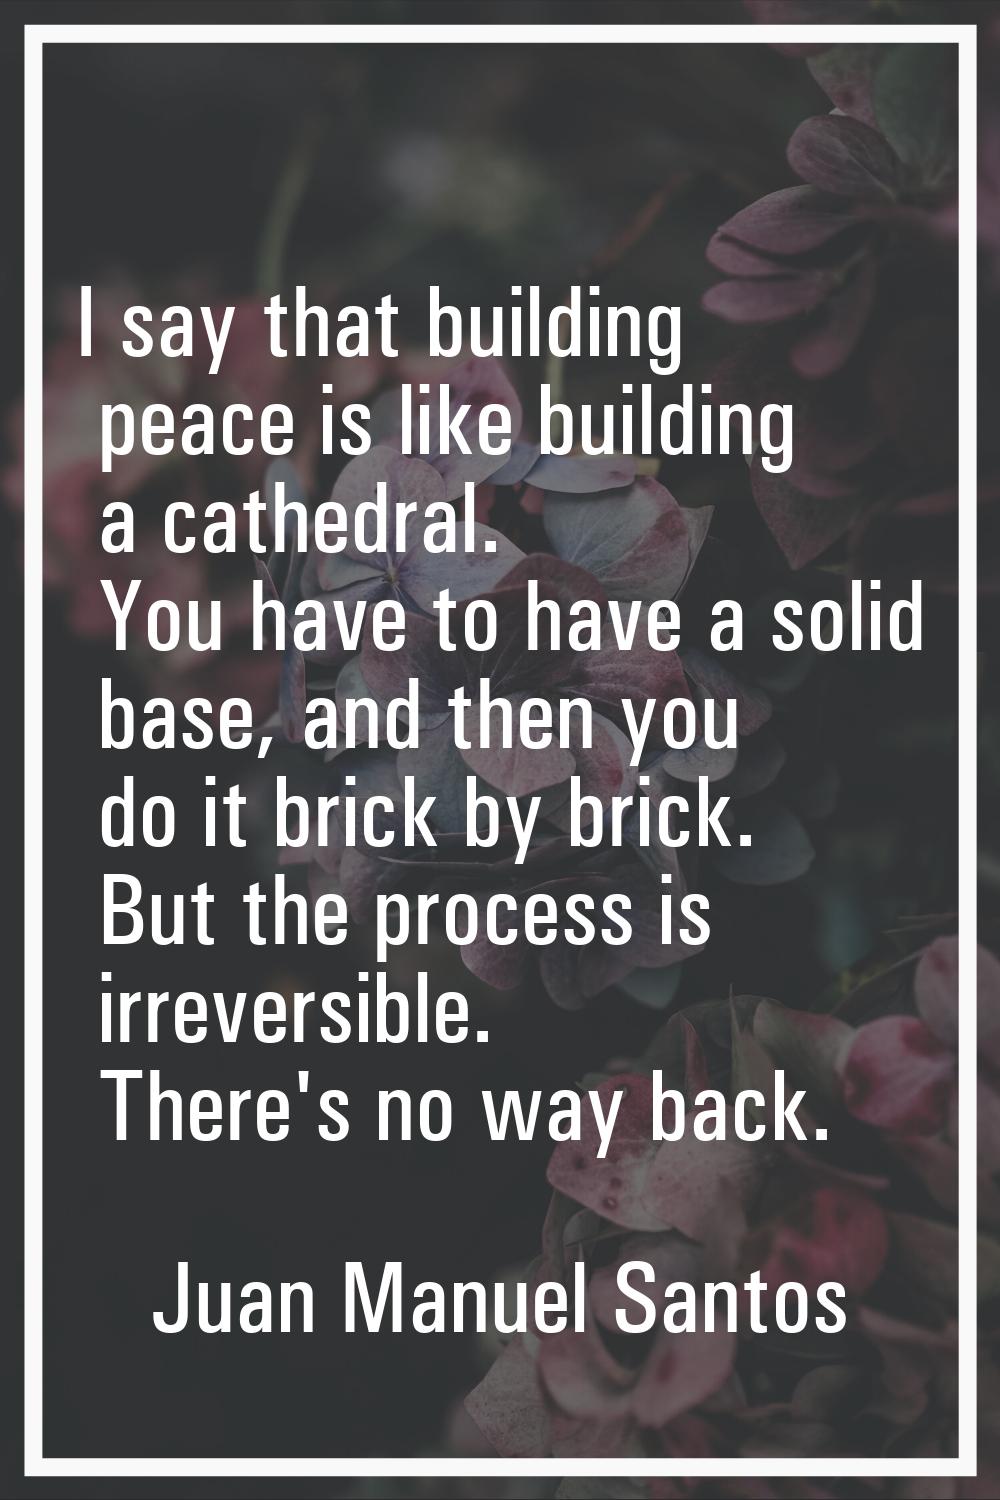 I say that building peace is like building a cathedral. You have to have a solid base, and then you